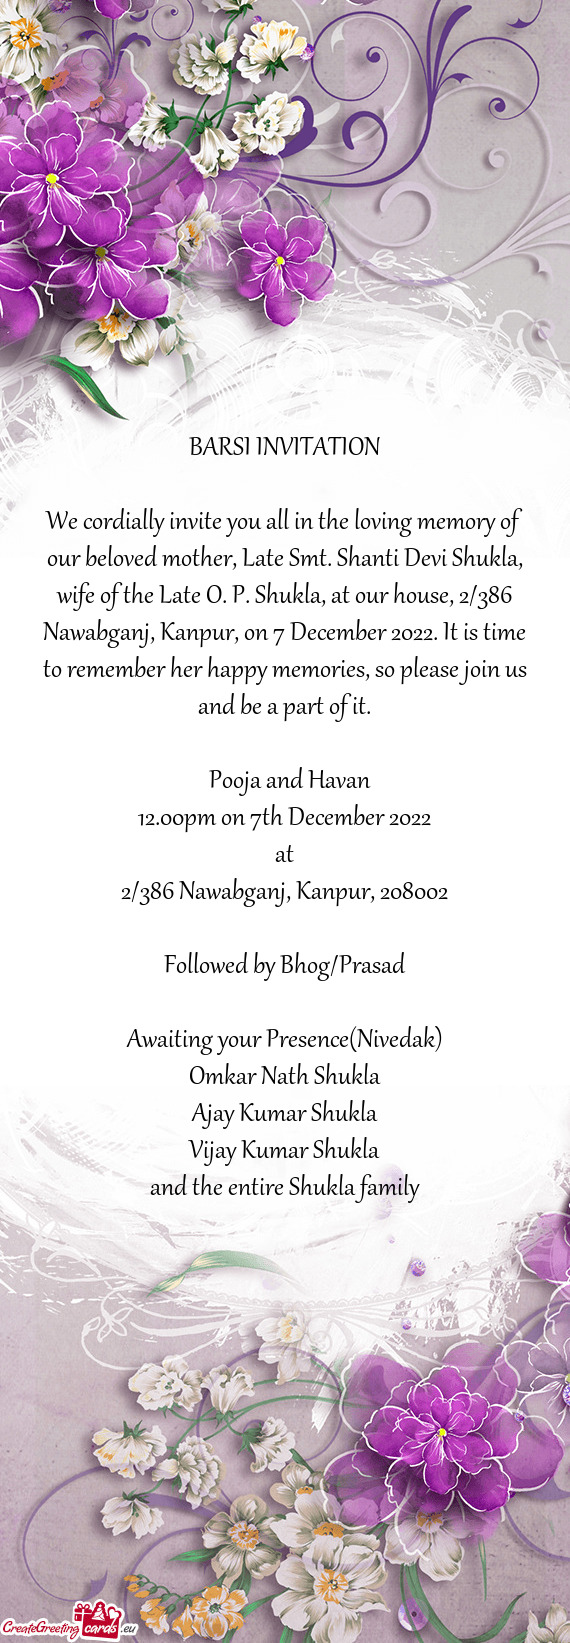 We cordially invite you all in the loving memory of our beloved mother, Late Smt. Shanti Devi Shukla